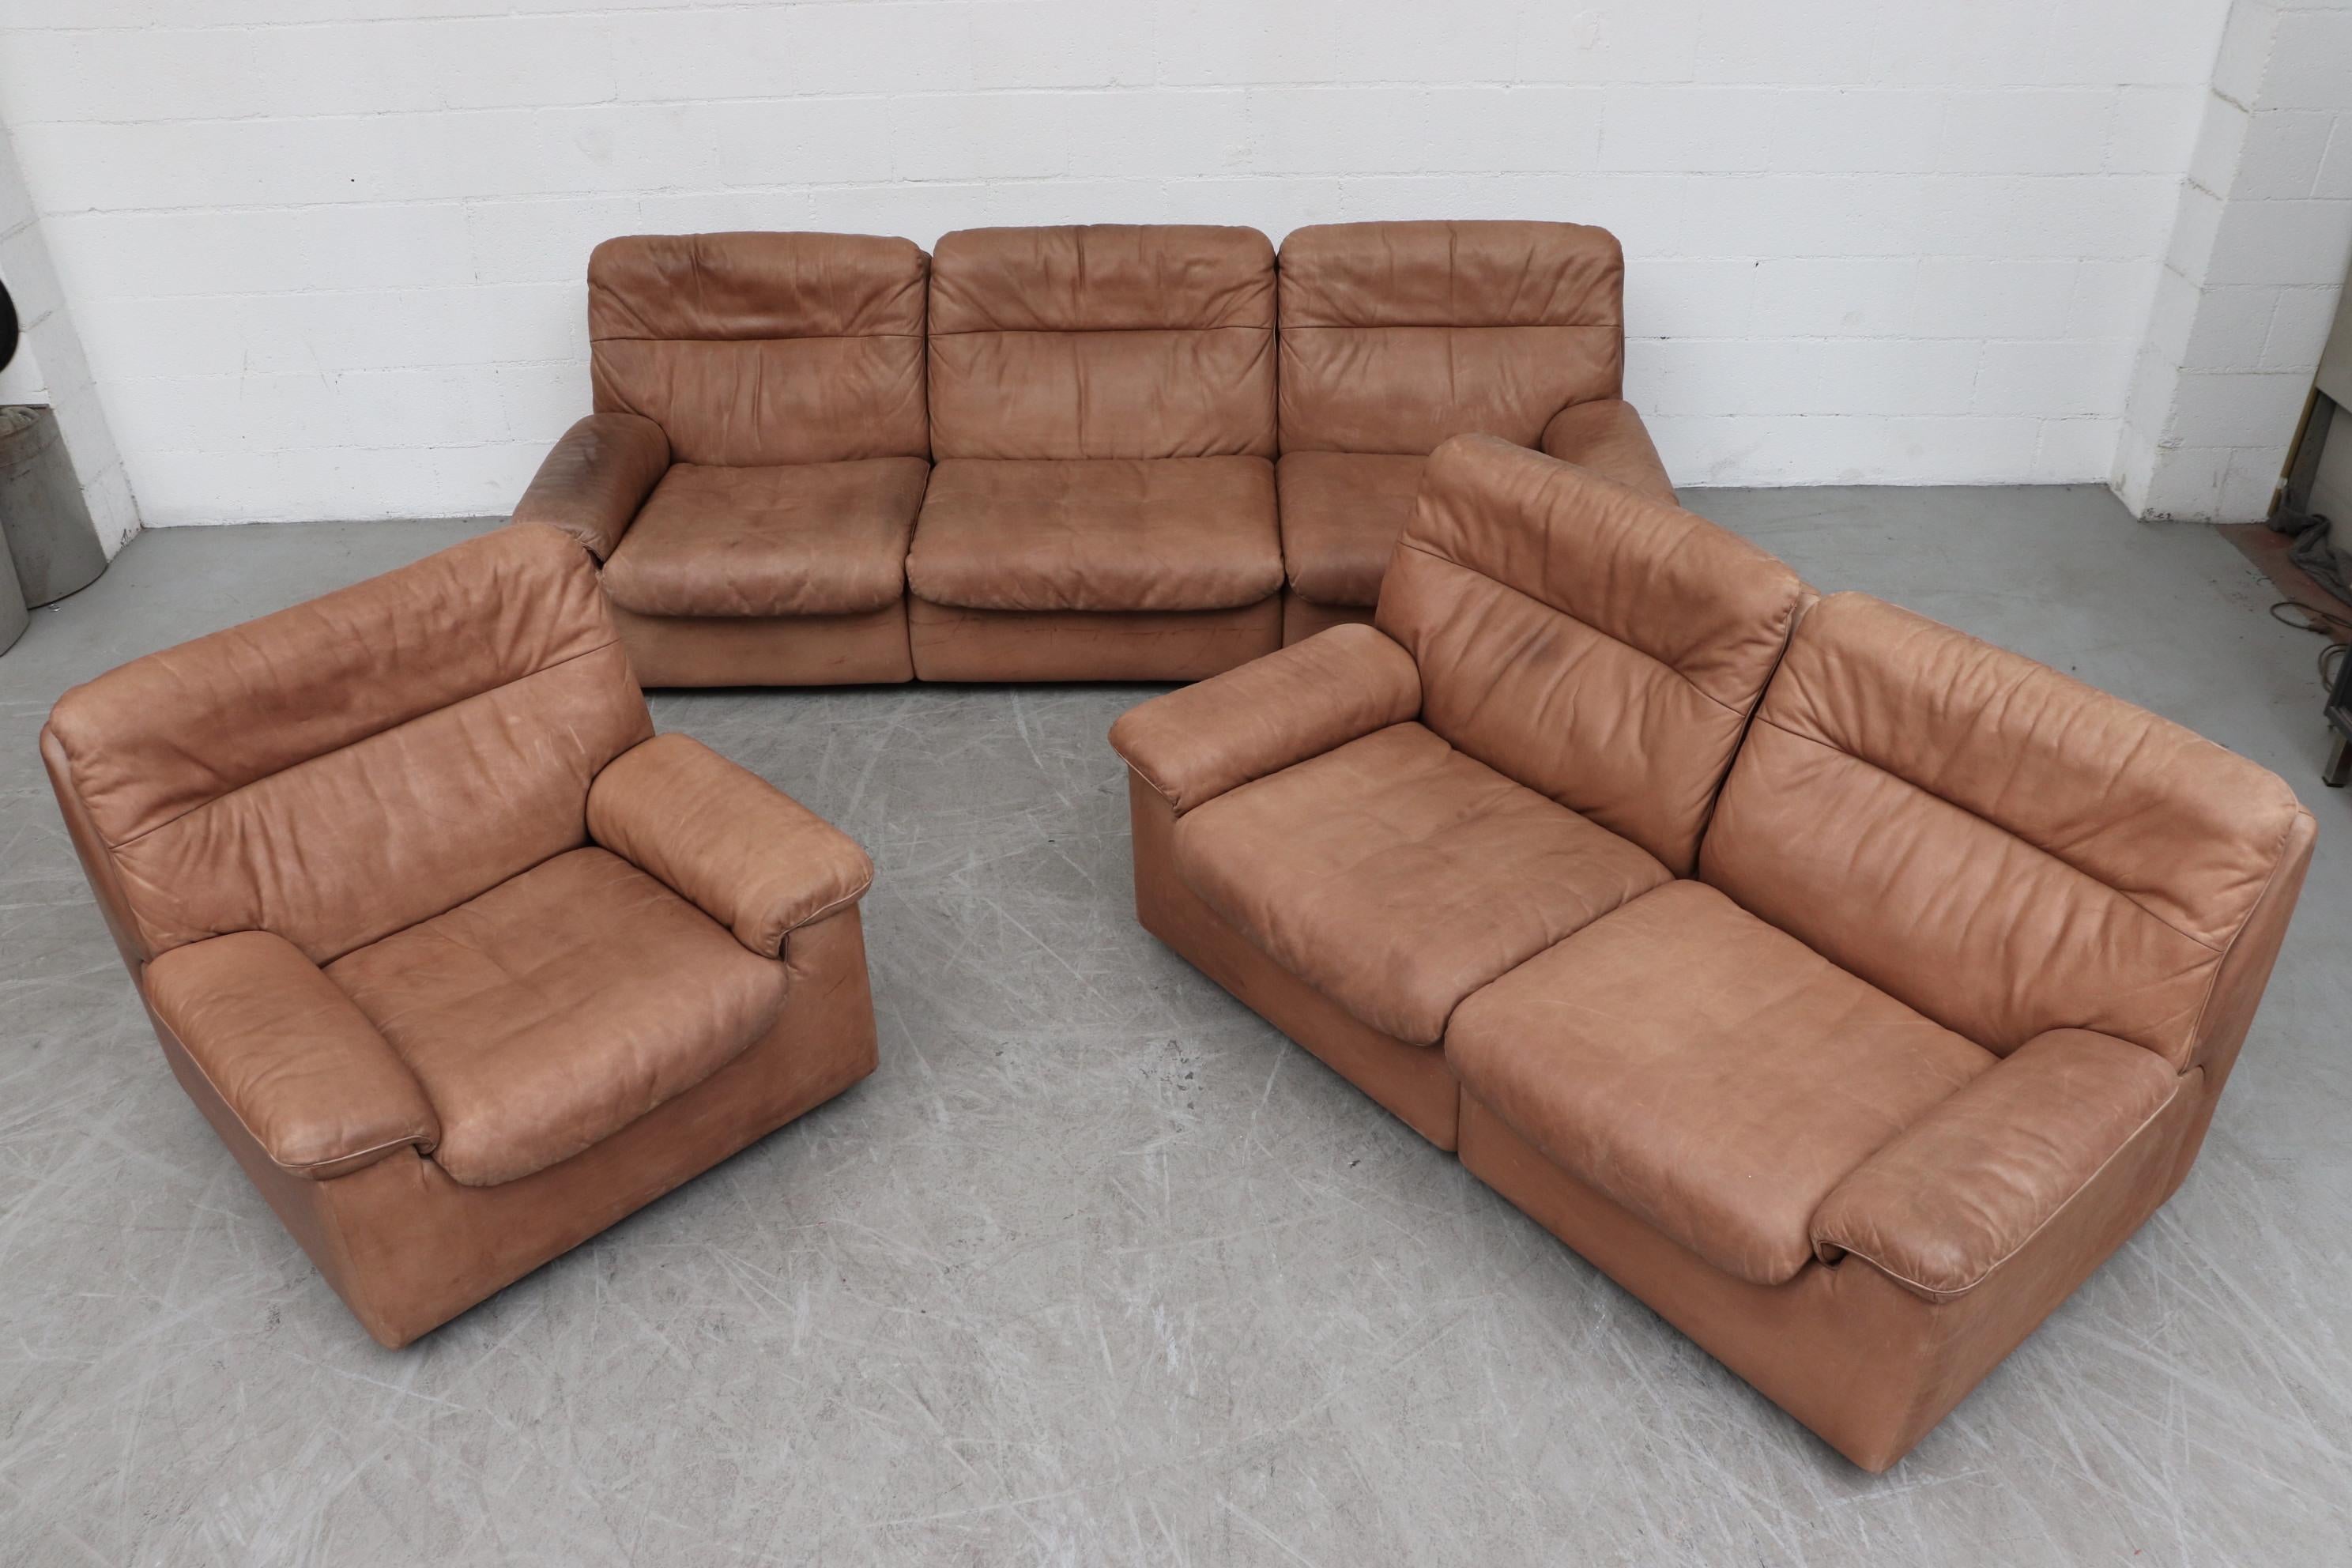 Handsome De Sede DS 66 natural leather lounge chair. Thick light brown leather with nice patina. In original condition with visible signs of wear consistent with age and use. Matching loveseat (LU922413830531) and 3-seat sofa available